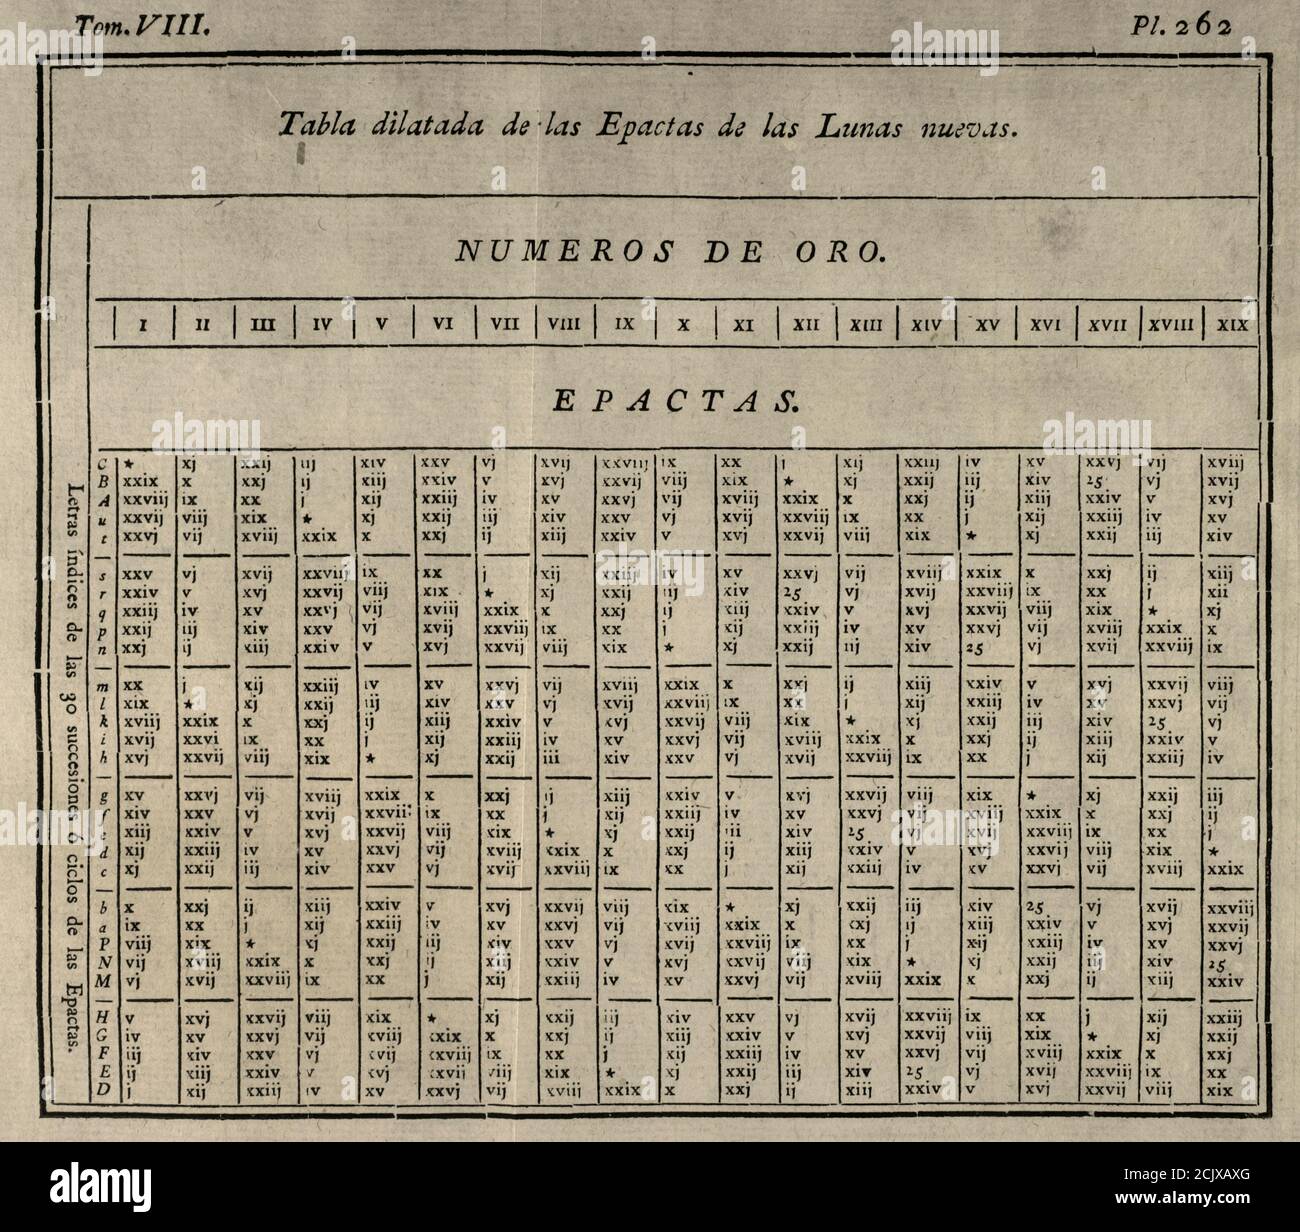 "Elementos de Matematica" (Elements of Mathematics), by the Spanish architect and mathematician Benito Bails (1730-1797). Expanded table of the Epacts of the New Moons. Volume VIII, which is about elements of physical astronomy, elements of chronology, elements of geography, elements of gnomonics, elements of perspective and elements of speculative music. Published in Madrid, 1775. Stock Photo